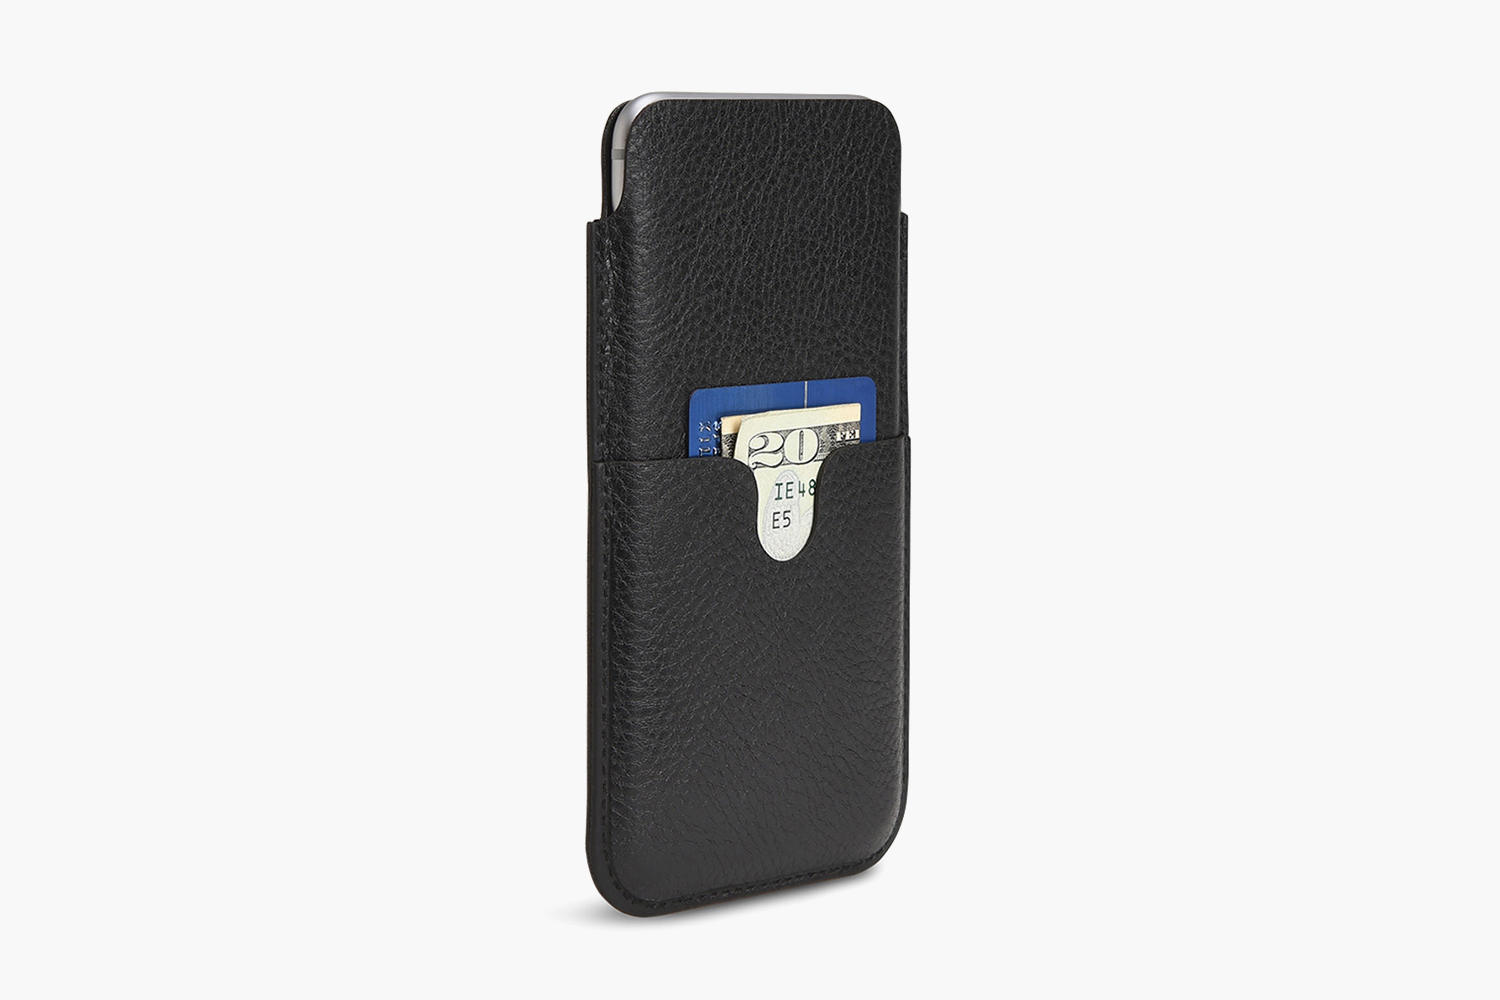 ITSMYDAY → killspencer-iphone-6-and-iphone-6-plus-accessories-collection-07